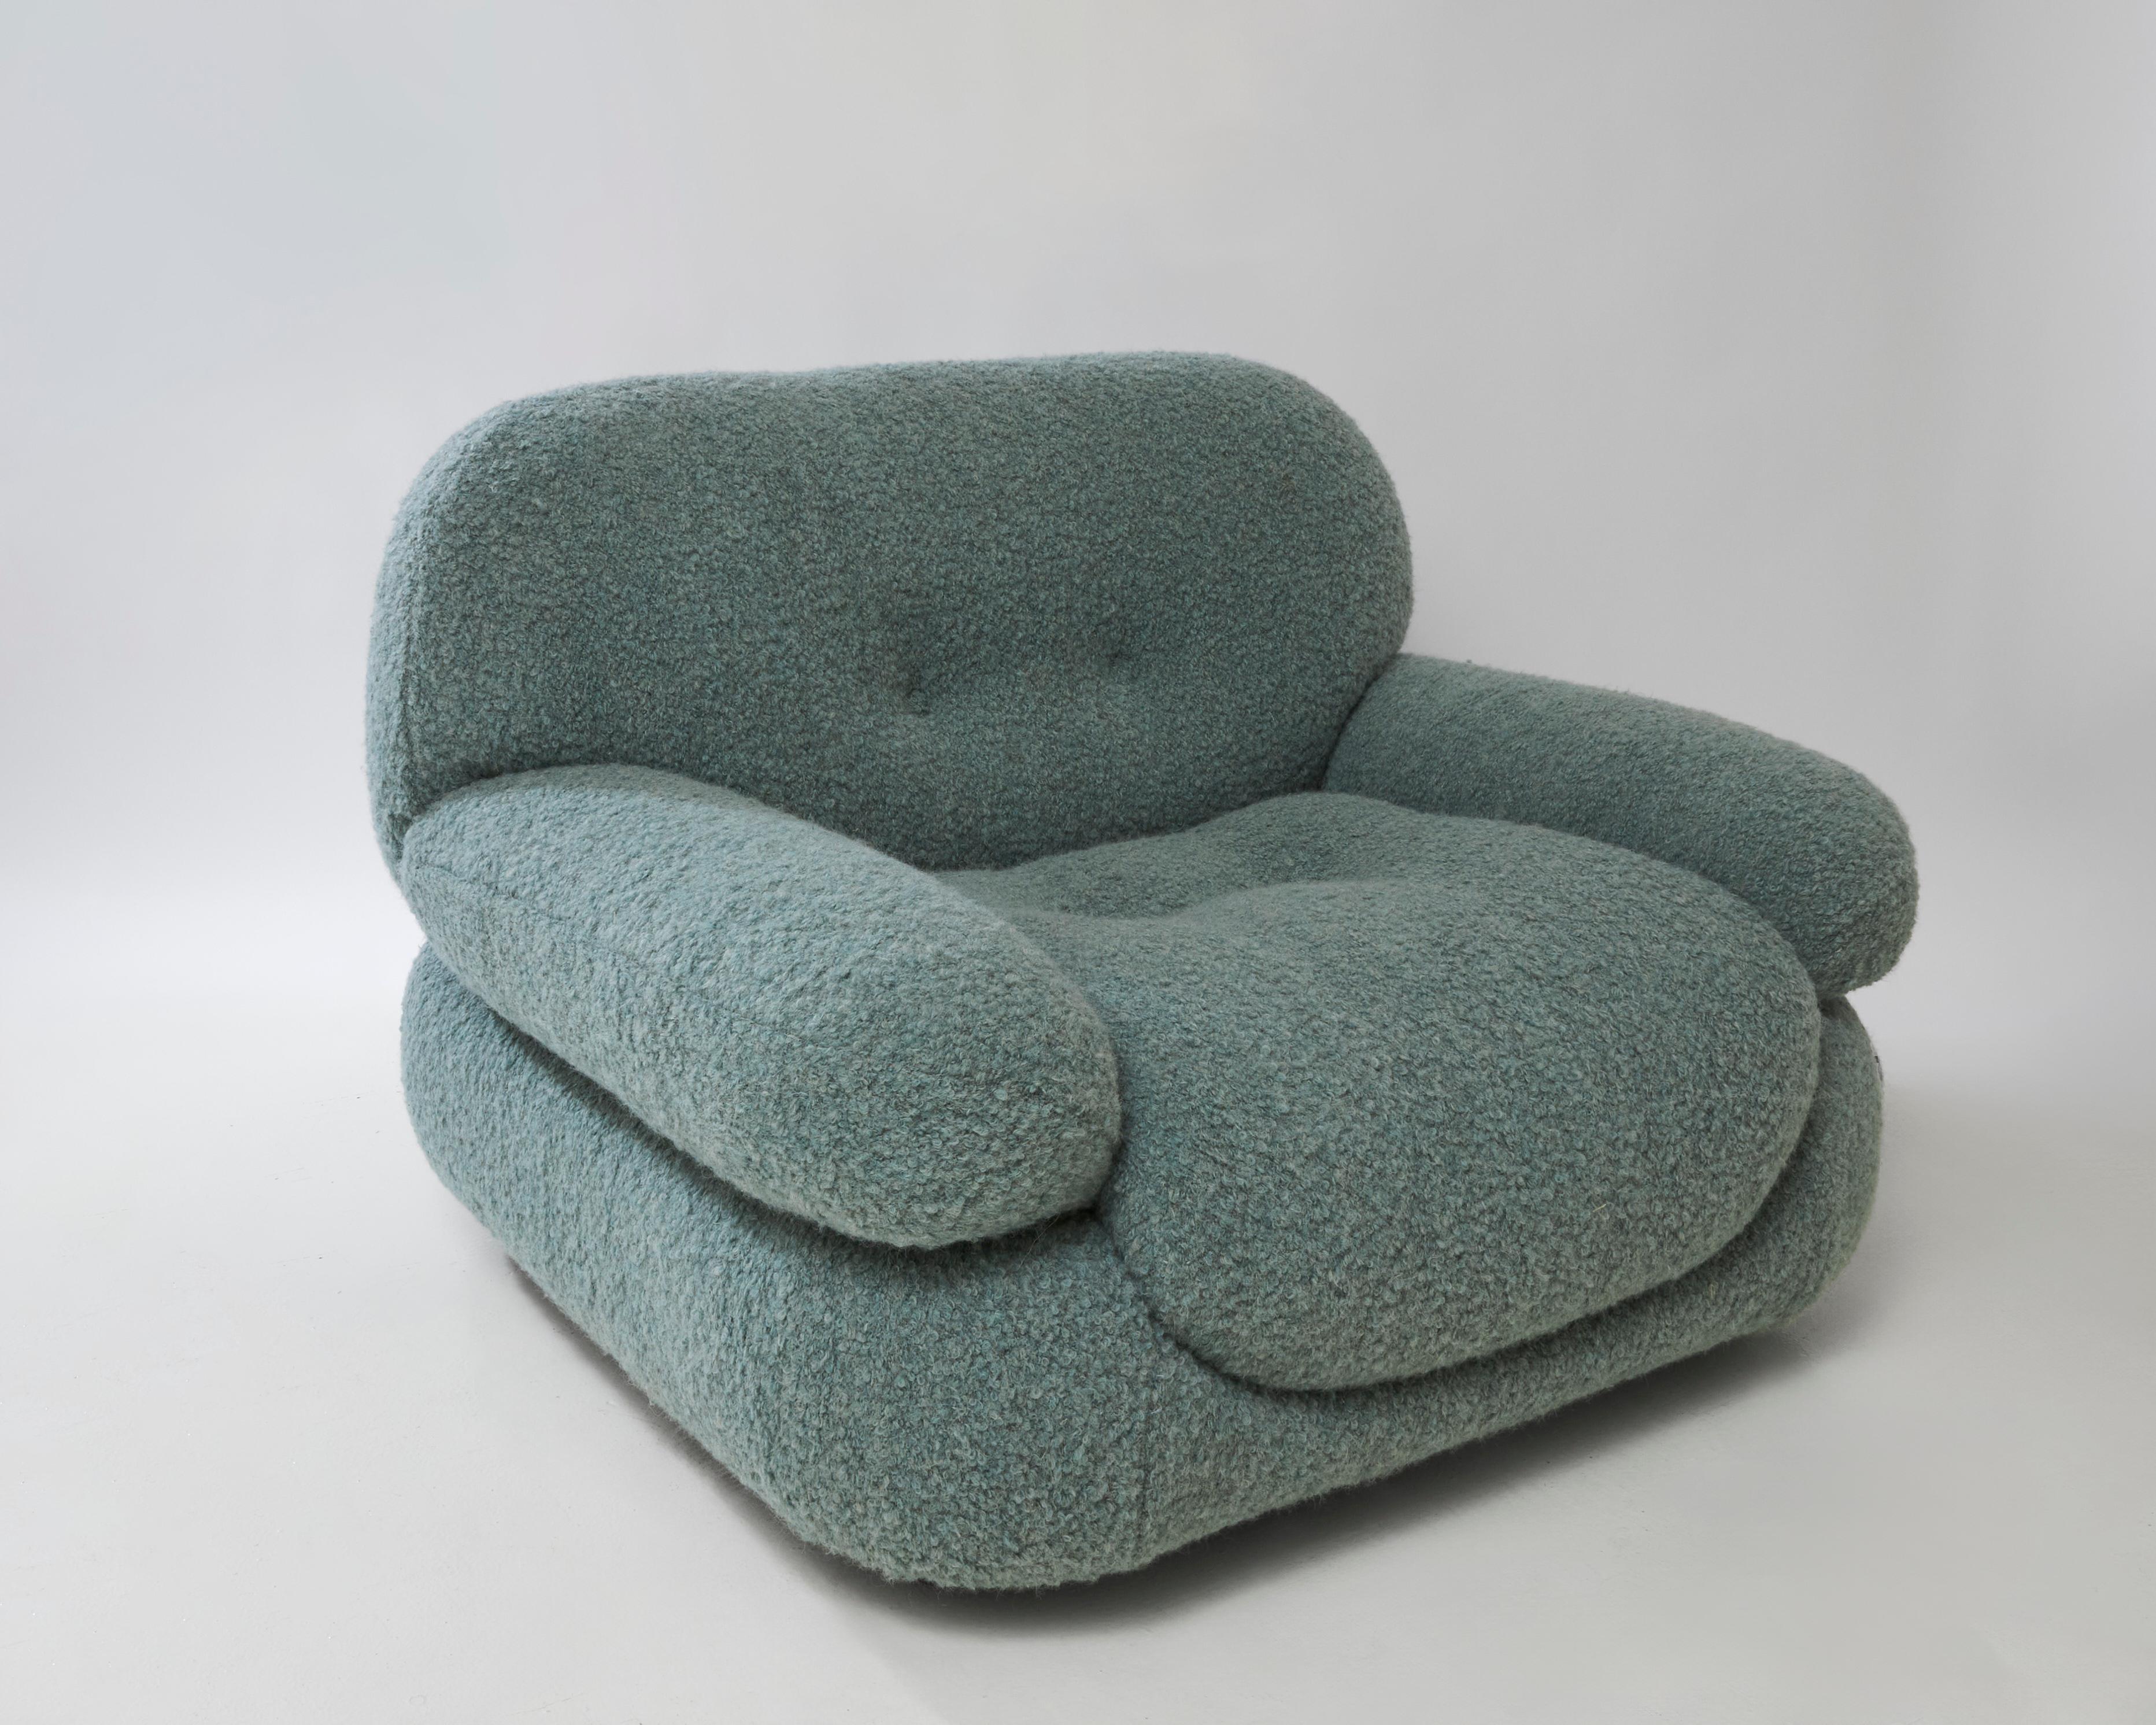 A spacious and comfortable armchair designed by Sapporo for Mobil Girgi in Italy during the 1970s. This large and stylish chair boasts fluffy cushions and inviting round shapes that beckon you to sit back and unwind. Designed with comfort in mind,